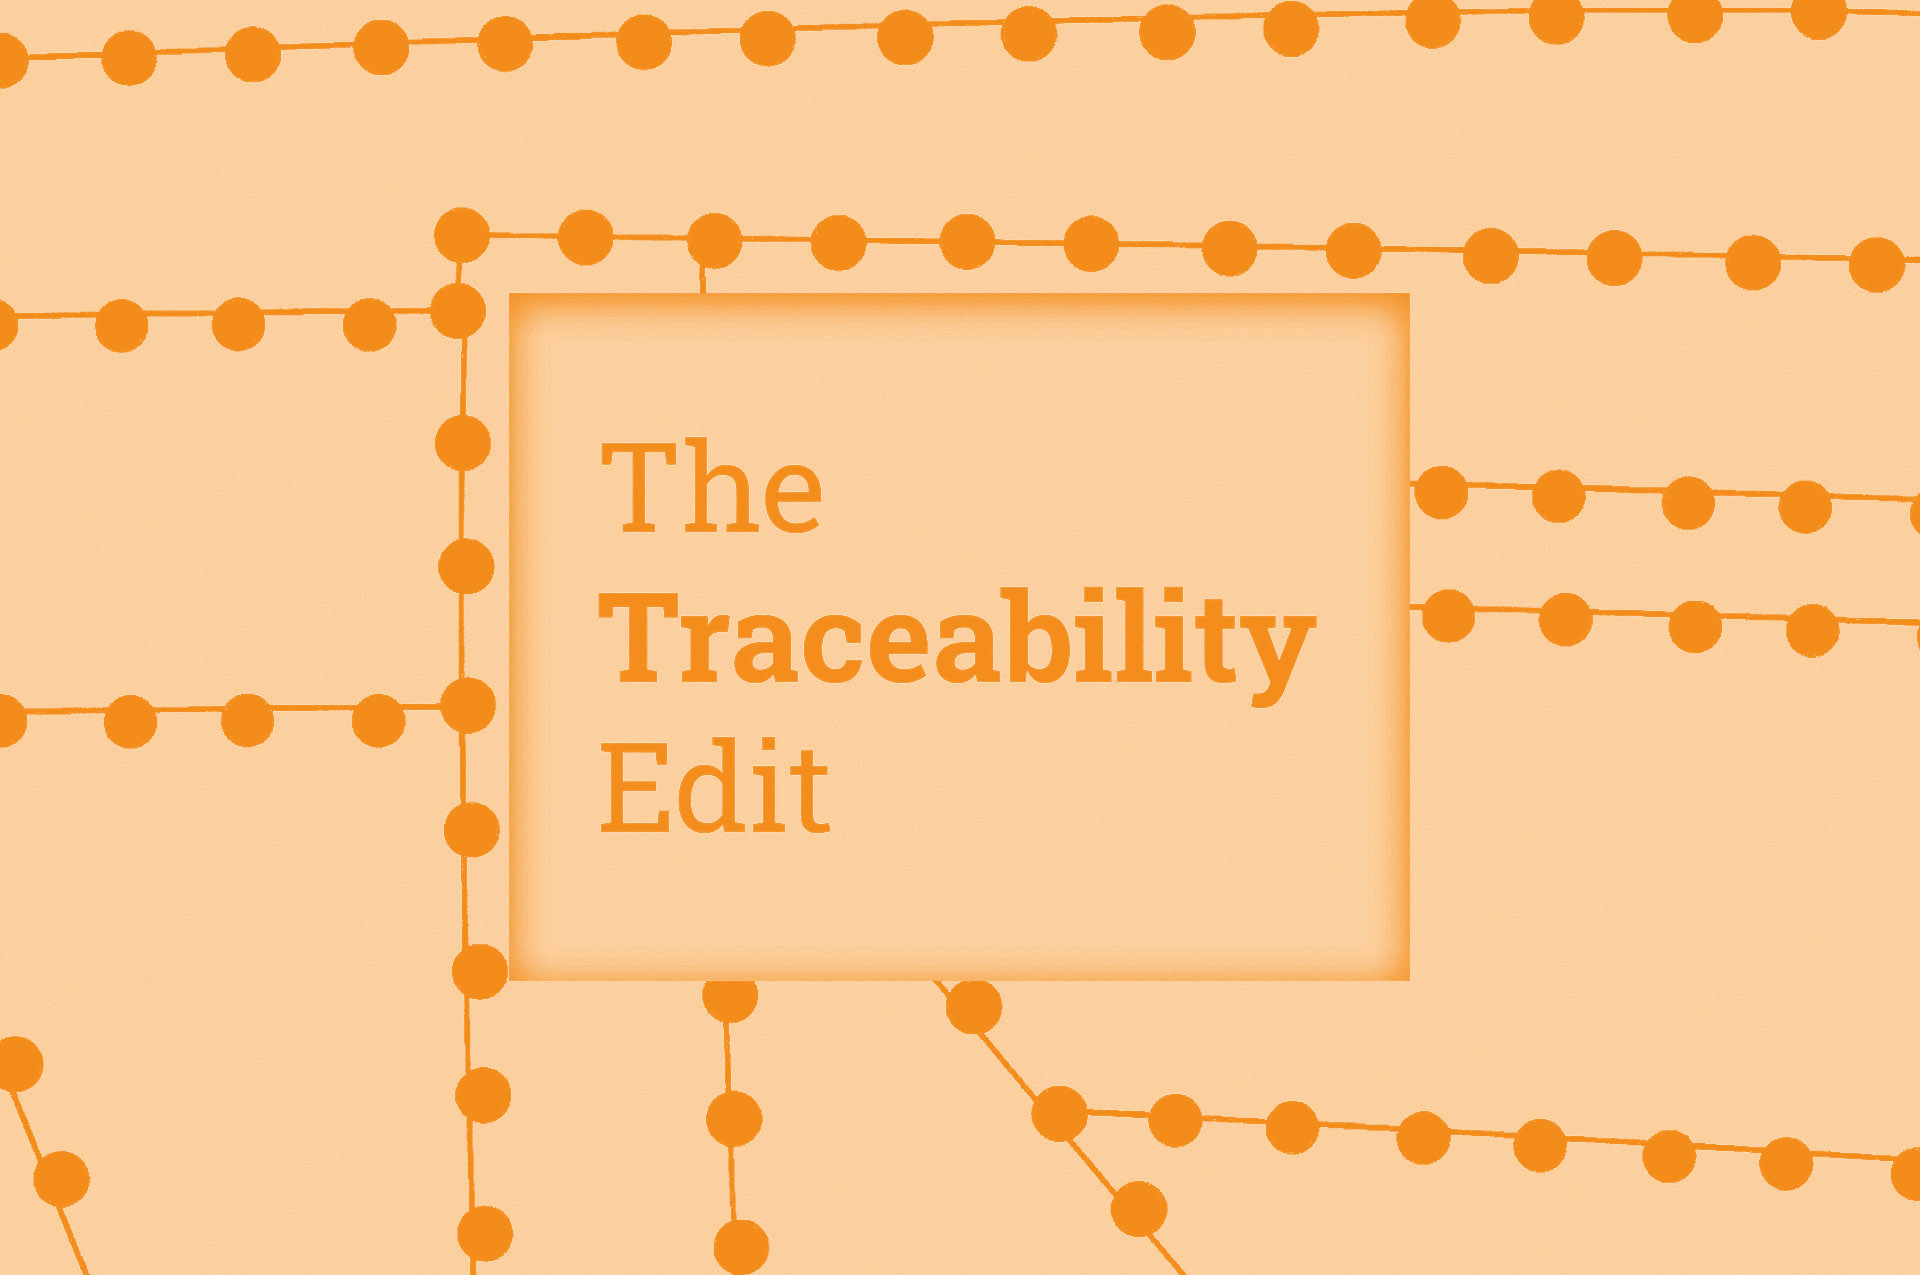 Traceability News to Read from March